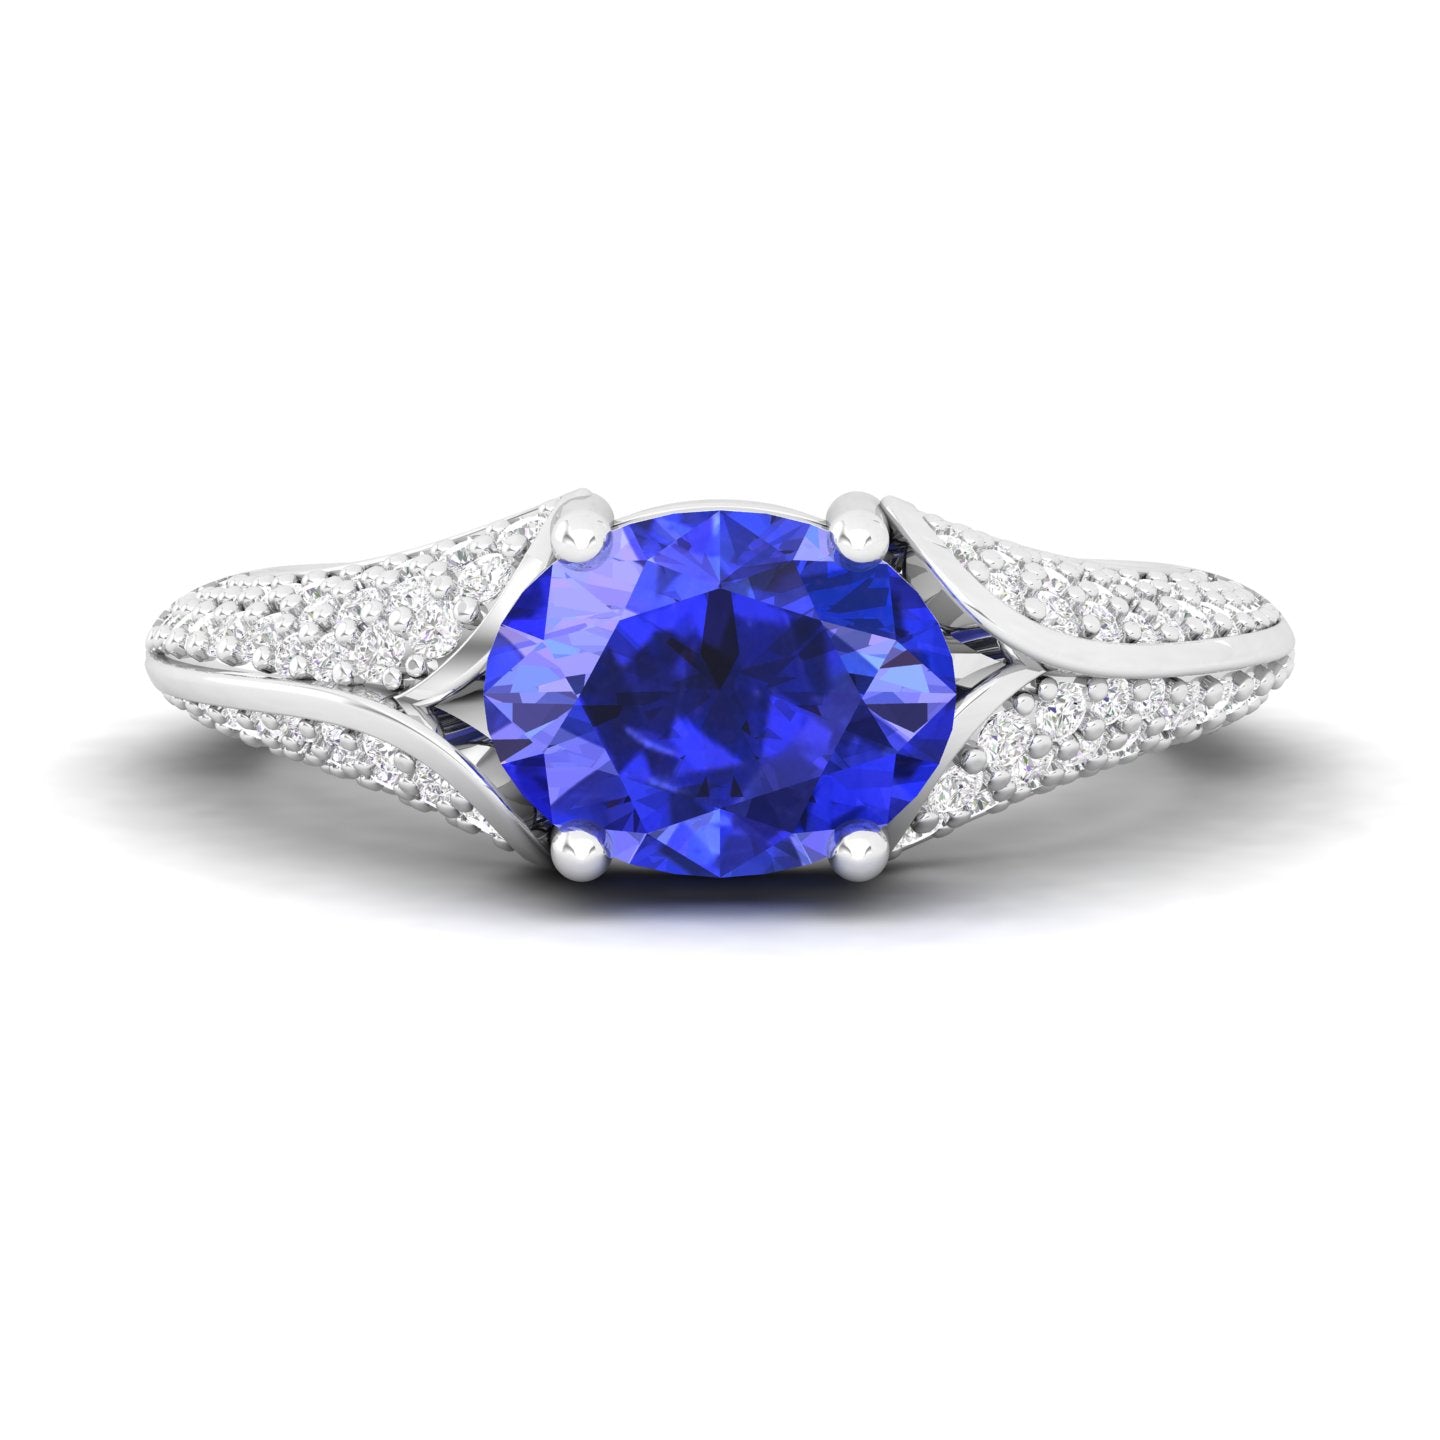 Maurya Solitaire Tanzanite Fiore East-West Knife Edge Engagement Ring with Accent Diamonds